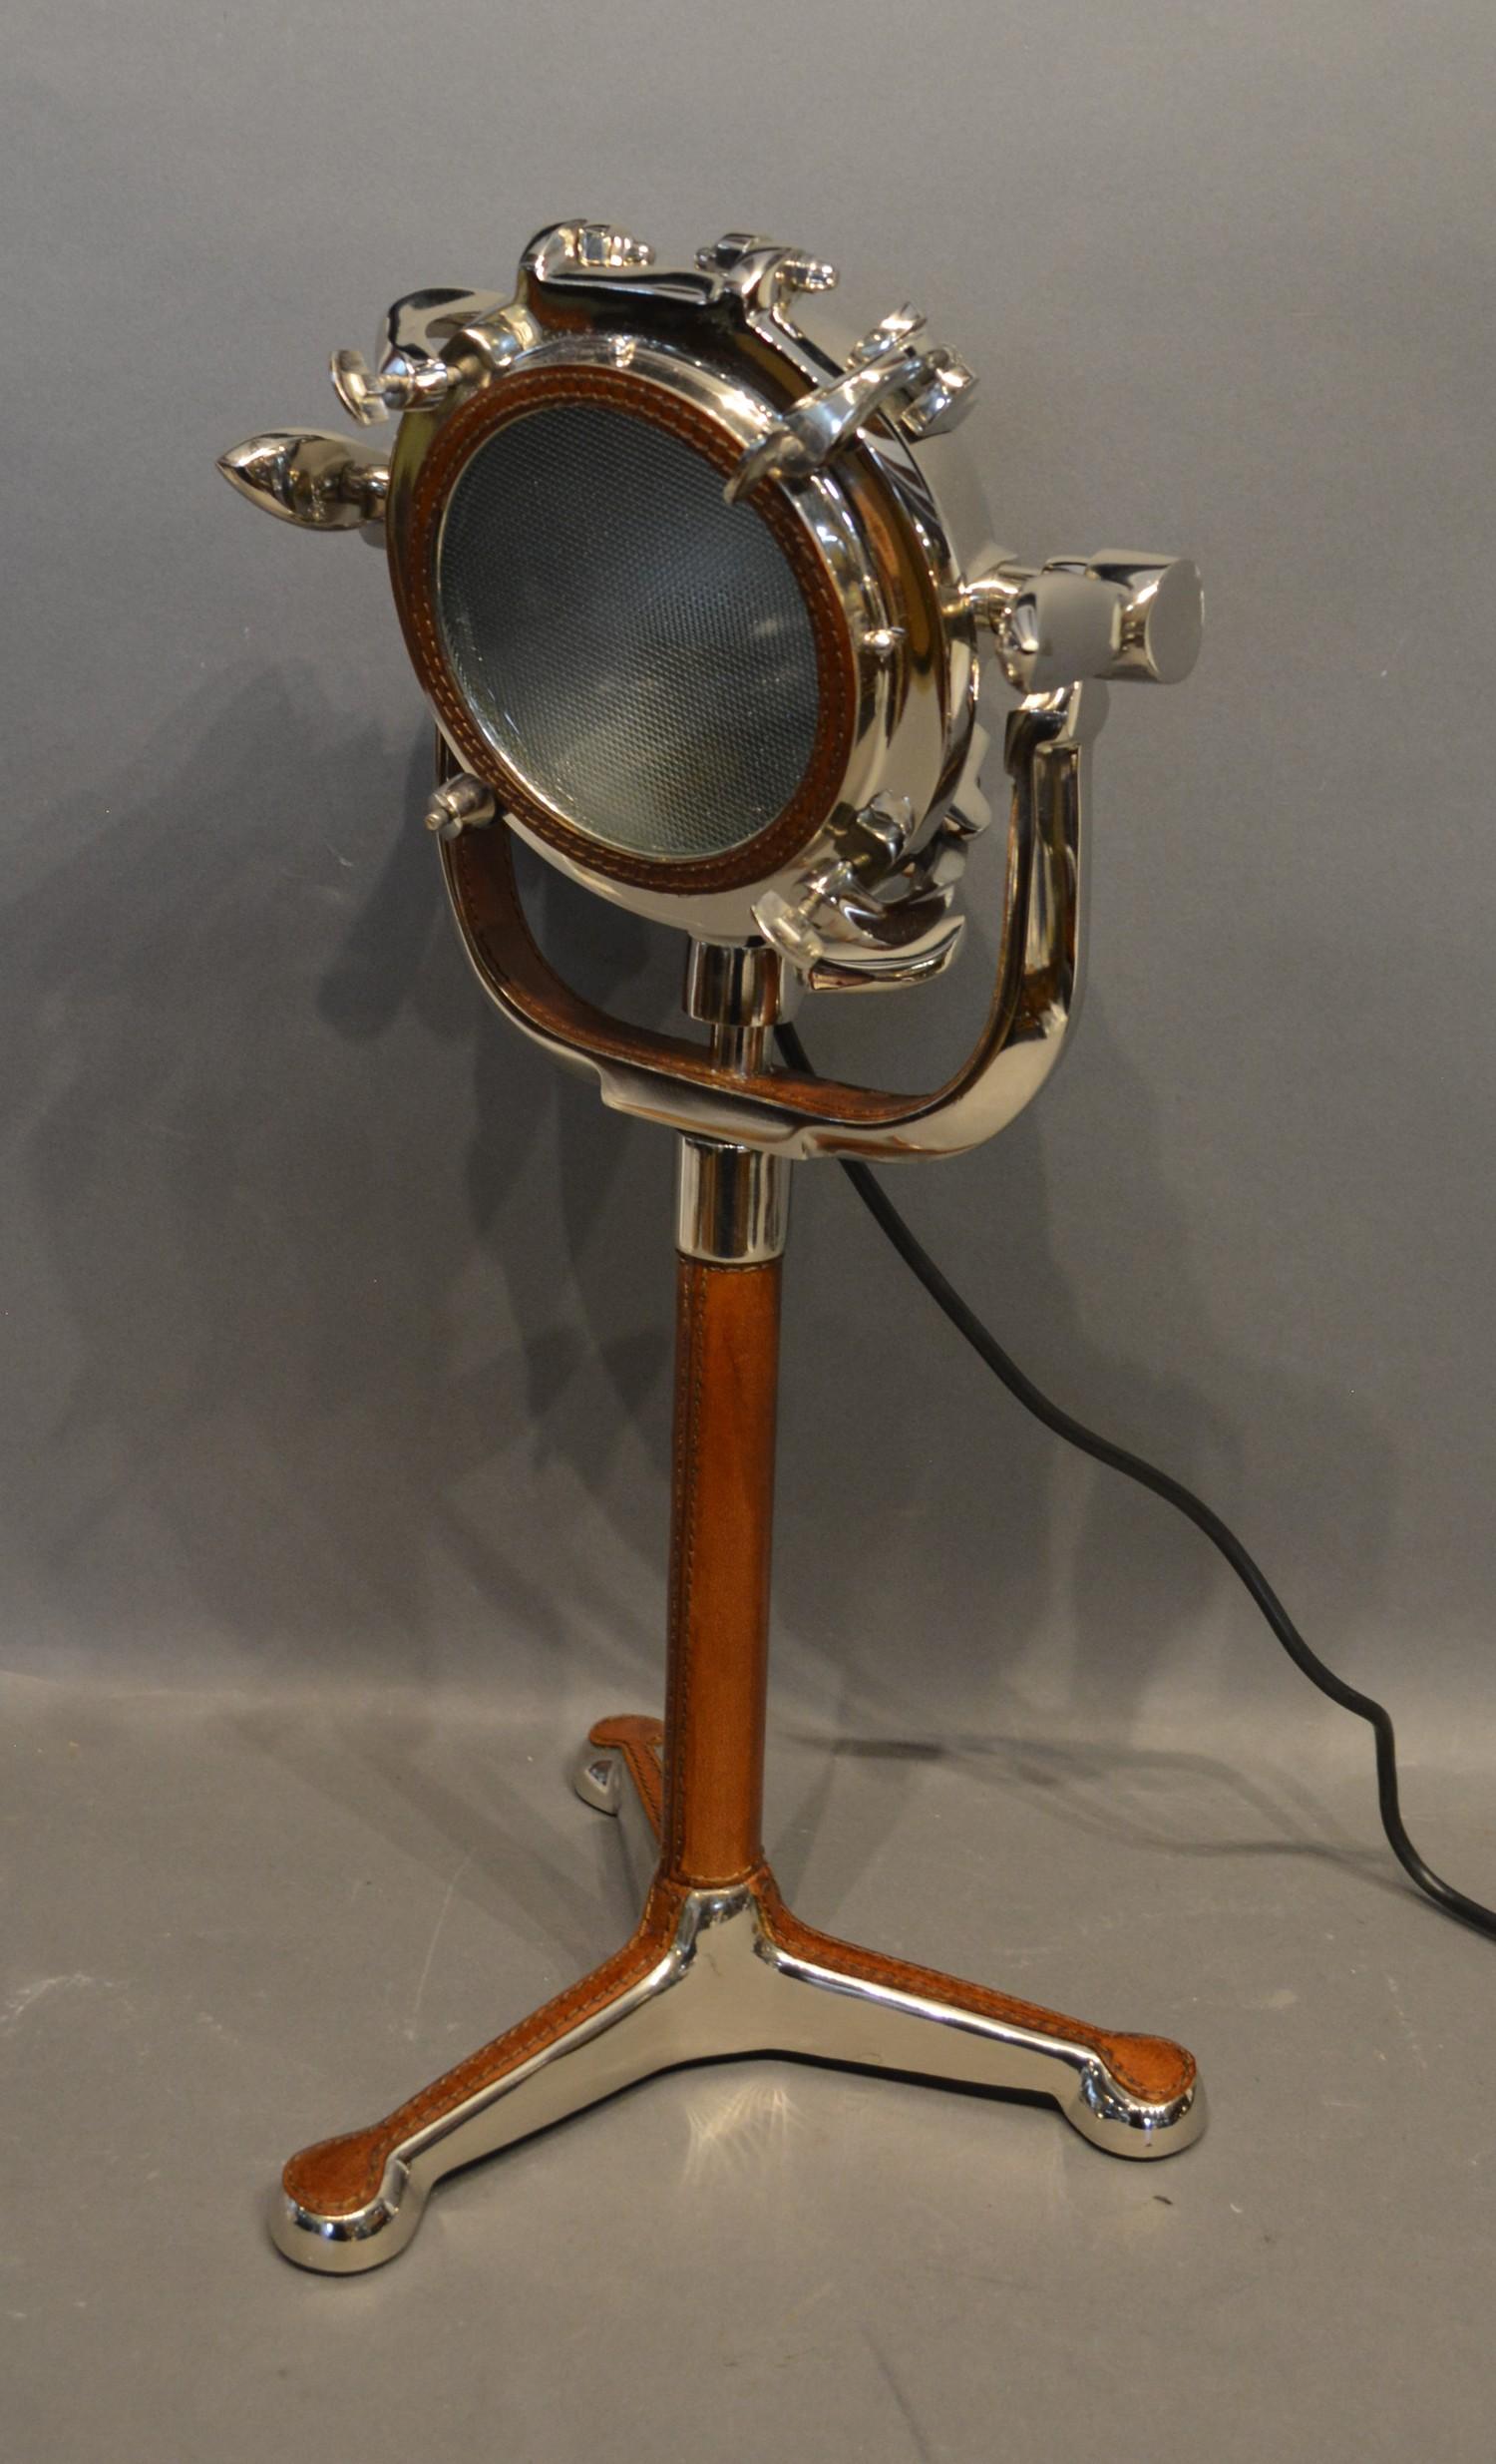 A Chromium and Leather Desk Lamp in the form of a port hole 49cm tall